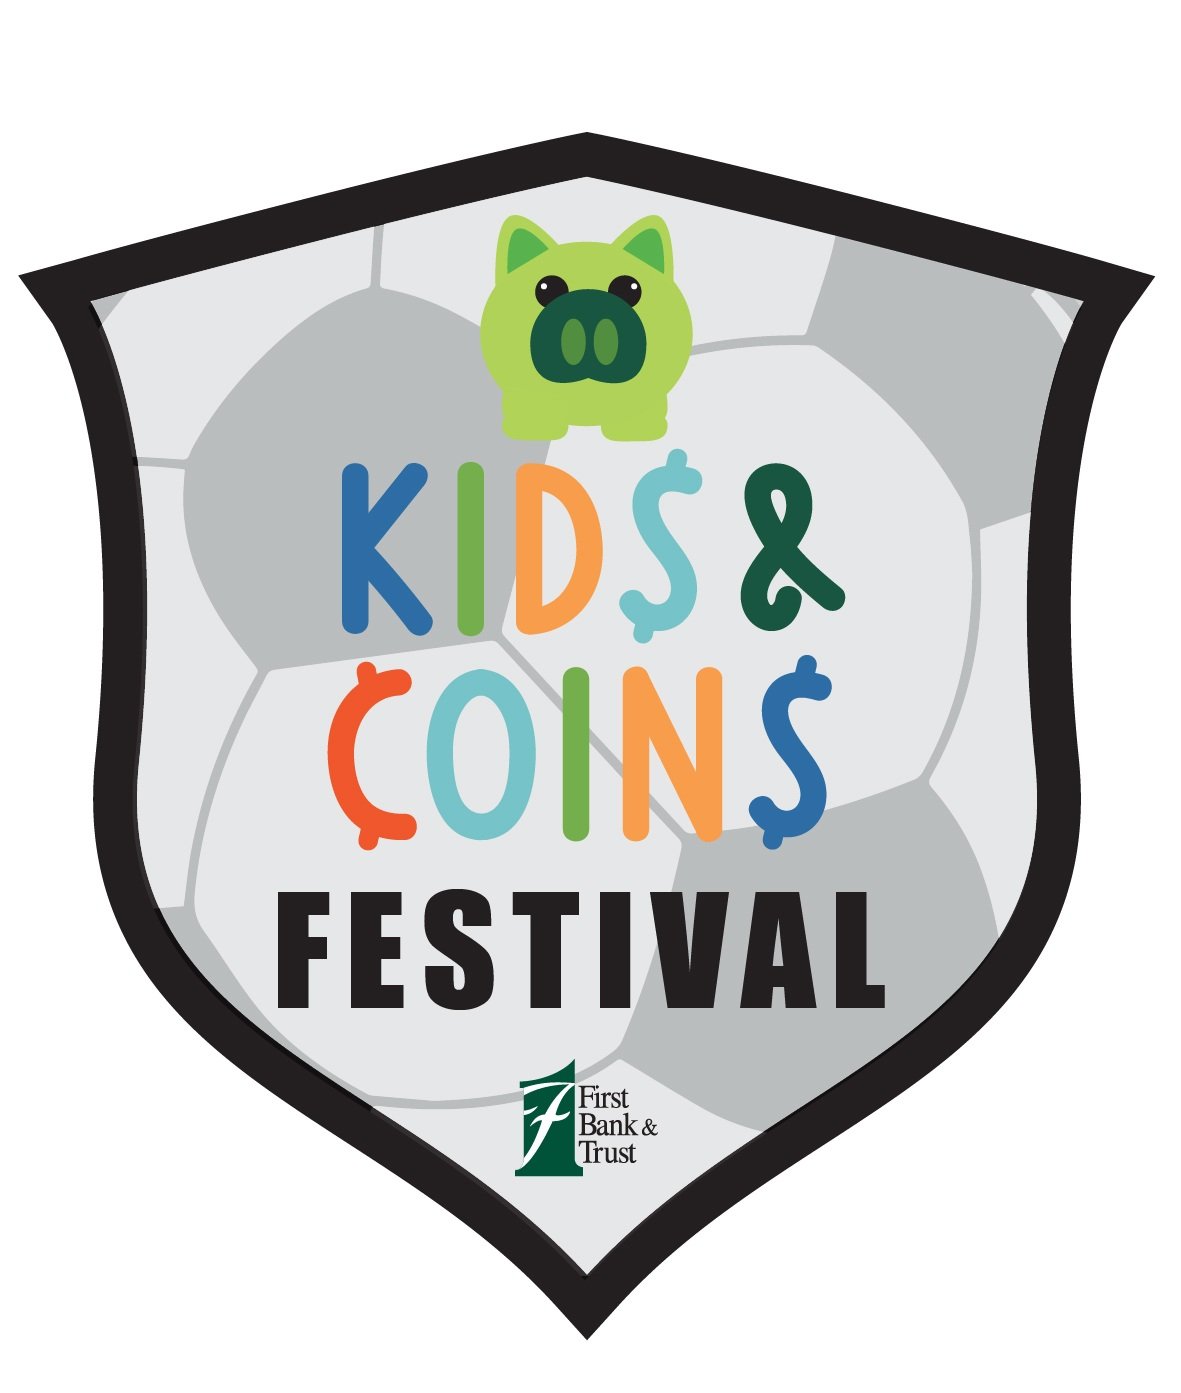 Kids & Coins Kickoff present by First Bank & Trust